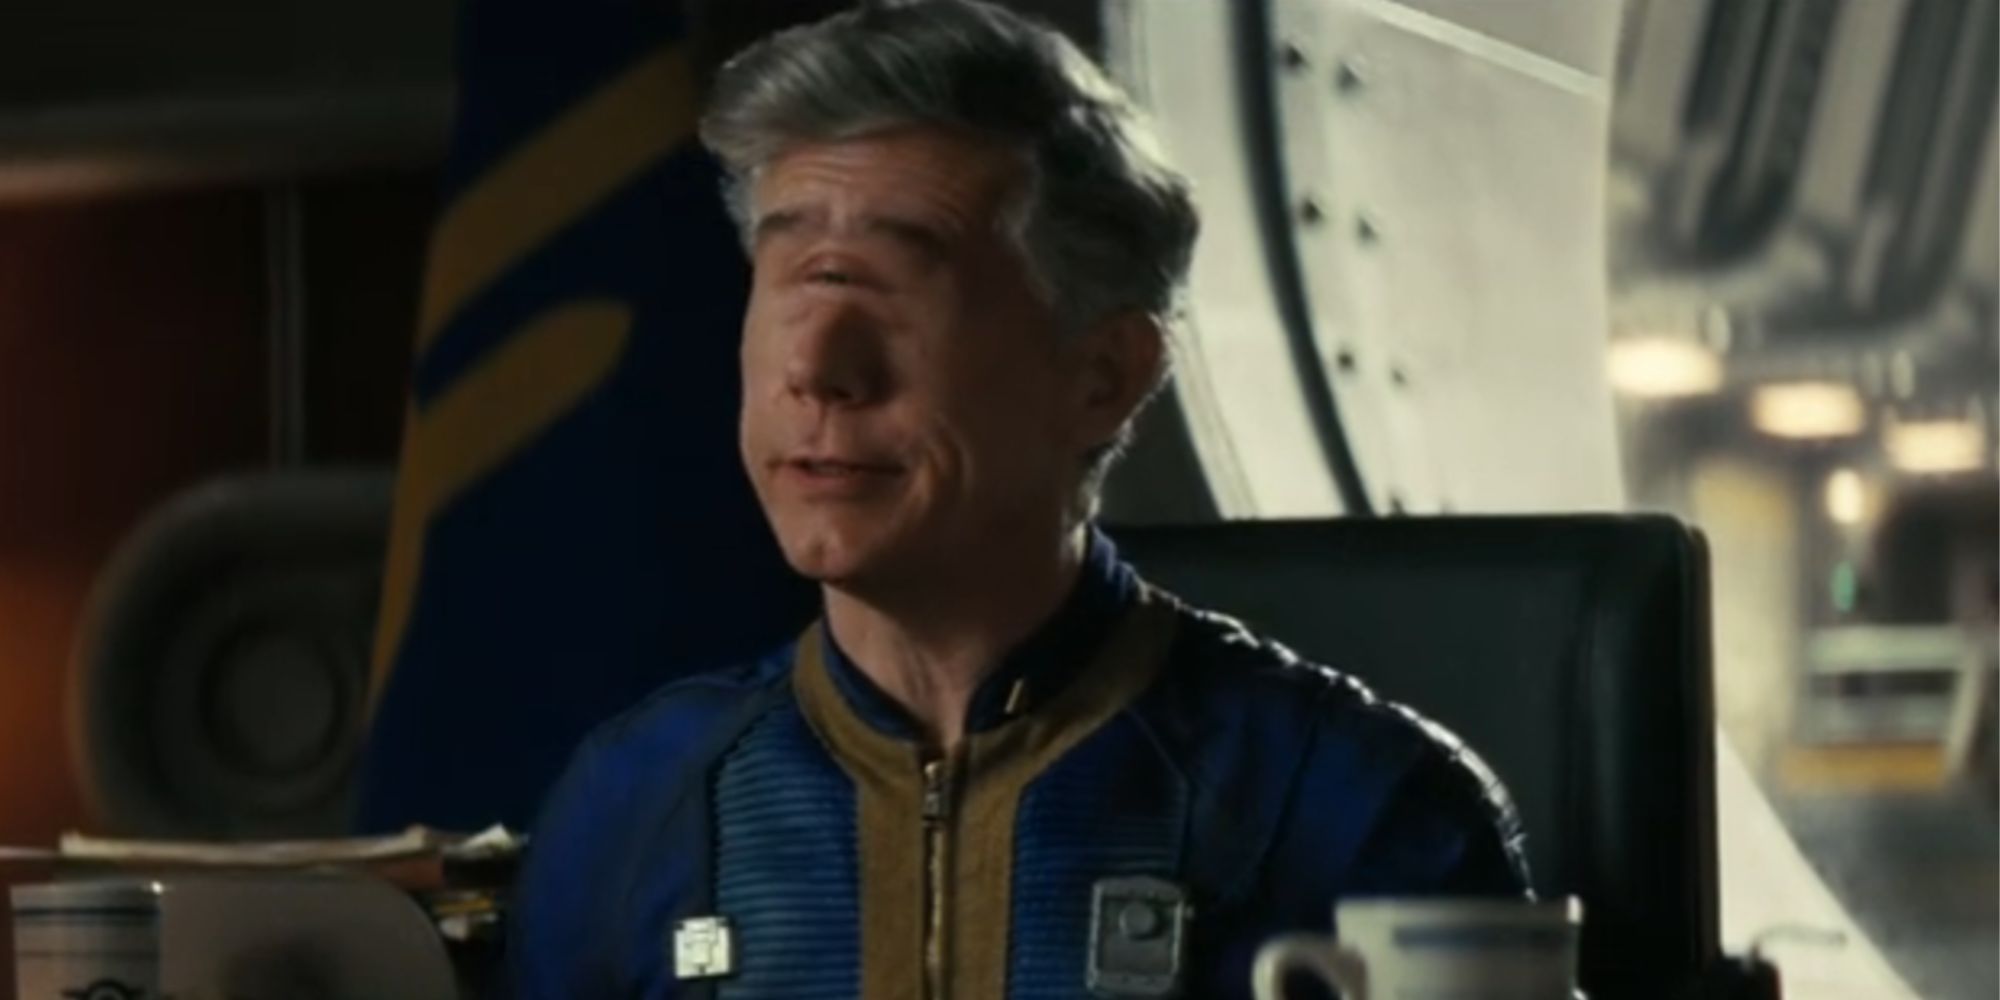 Chris Parnell as Overseer Benjamin in Fallout sitting behind a desk